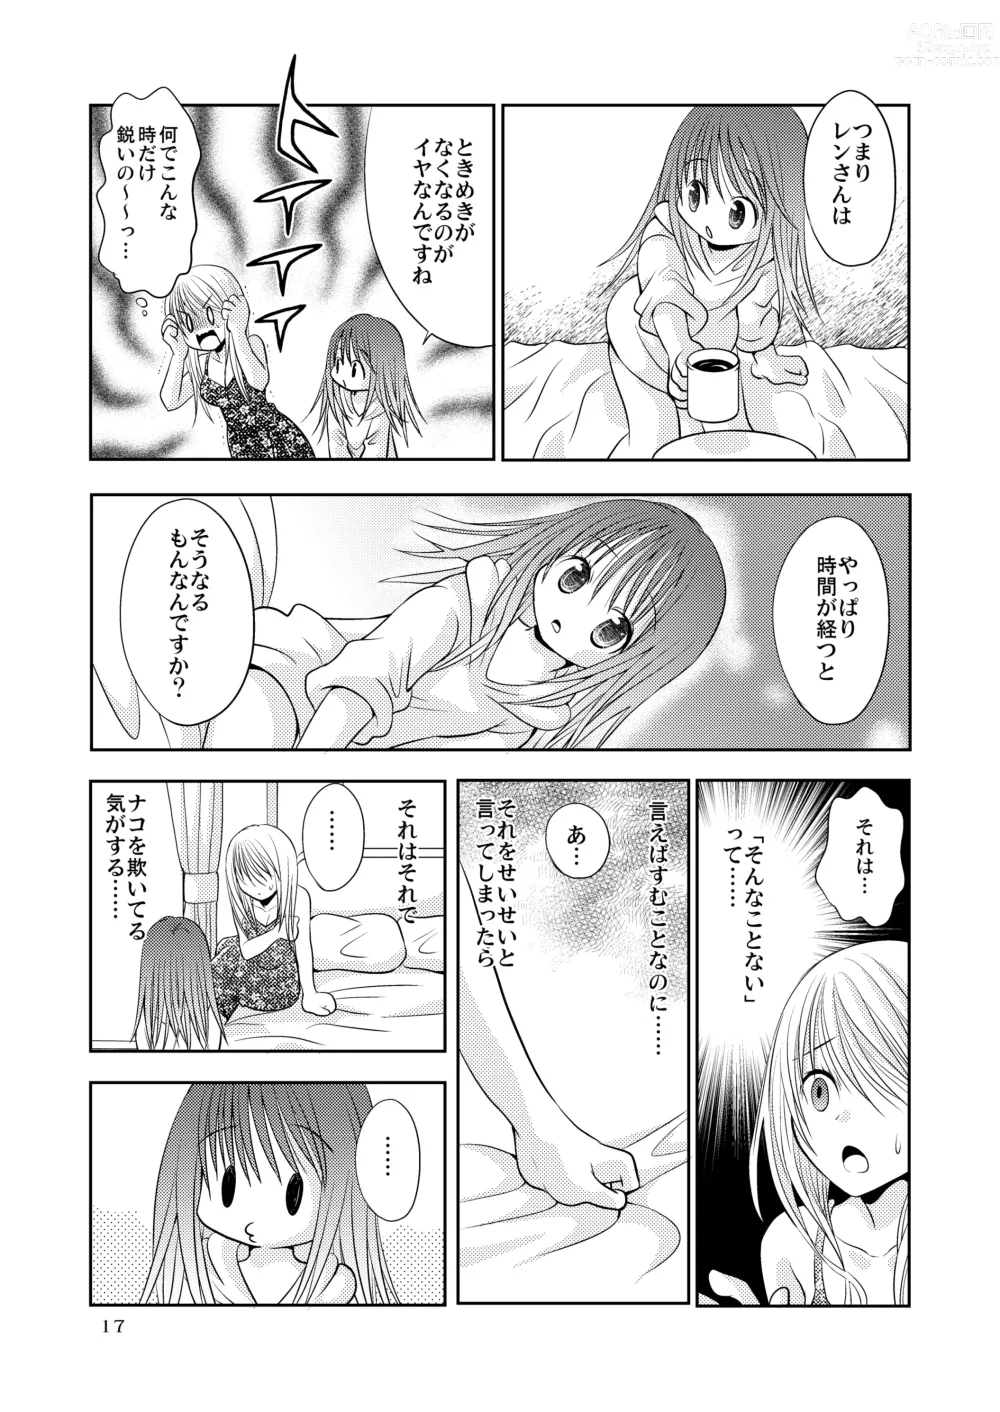 Page 16 of doujinshi Berry Berry Berry A